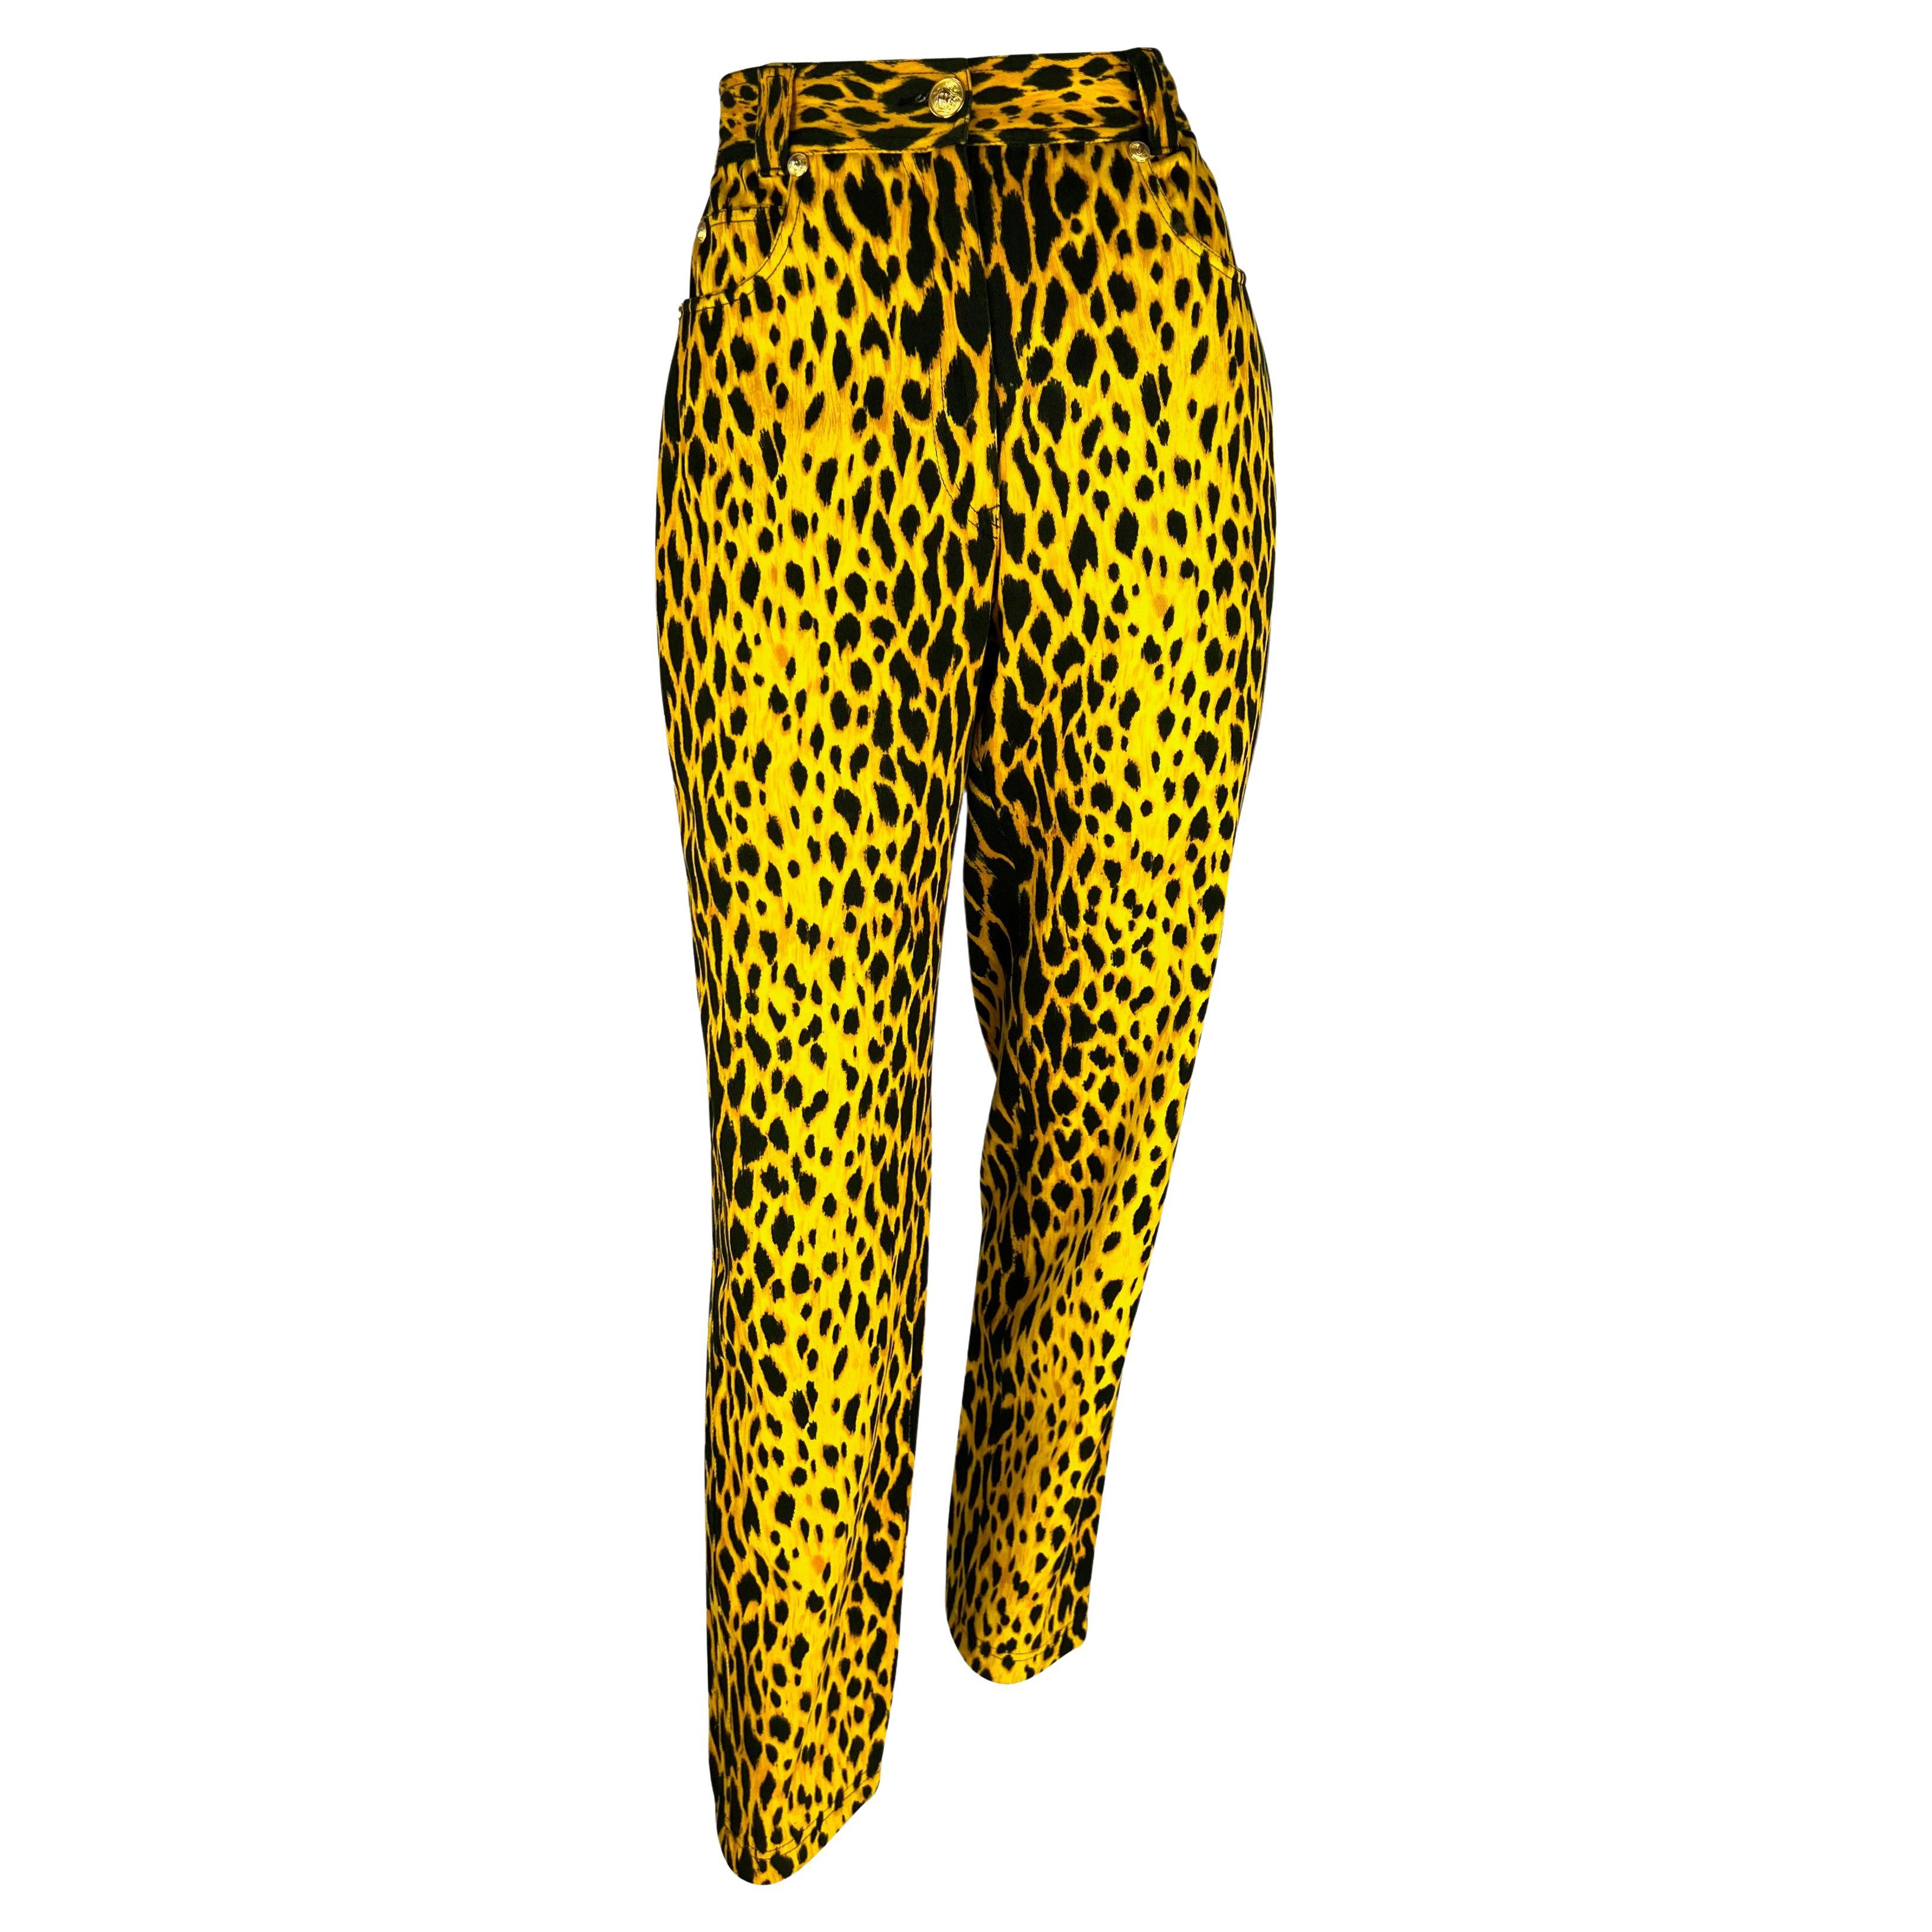 S/S 1992 Gianni Versace Runway Cheetah Print Yellow Black Cotton Stretch Jeans For Sale